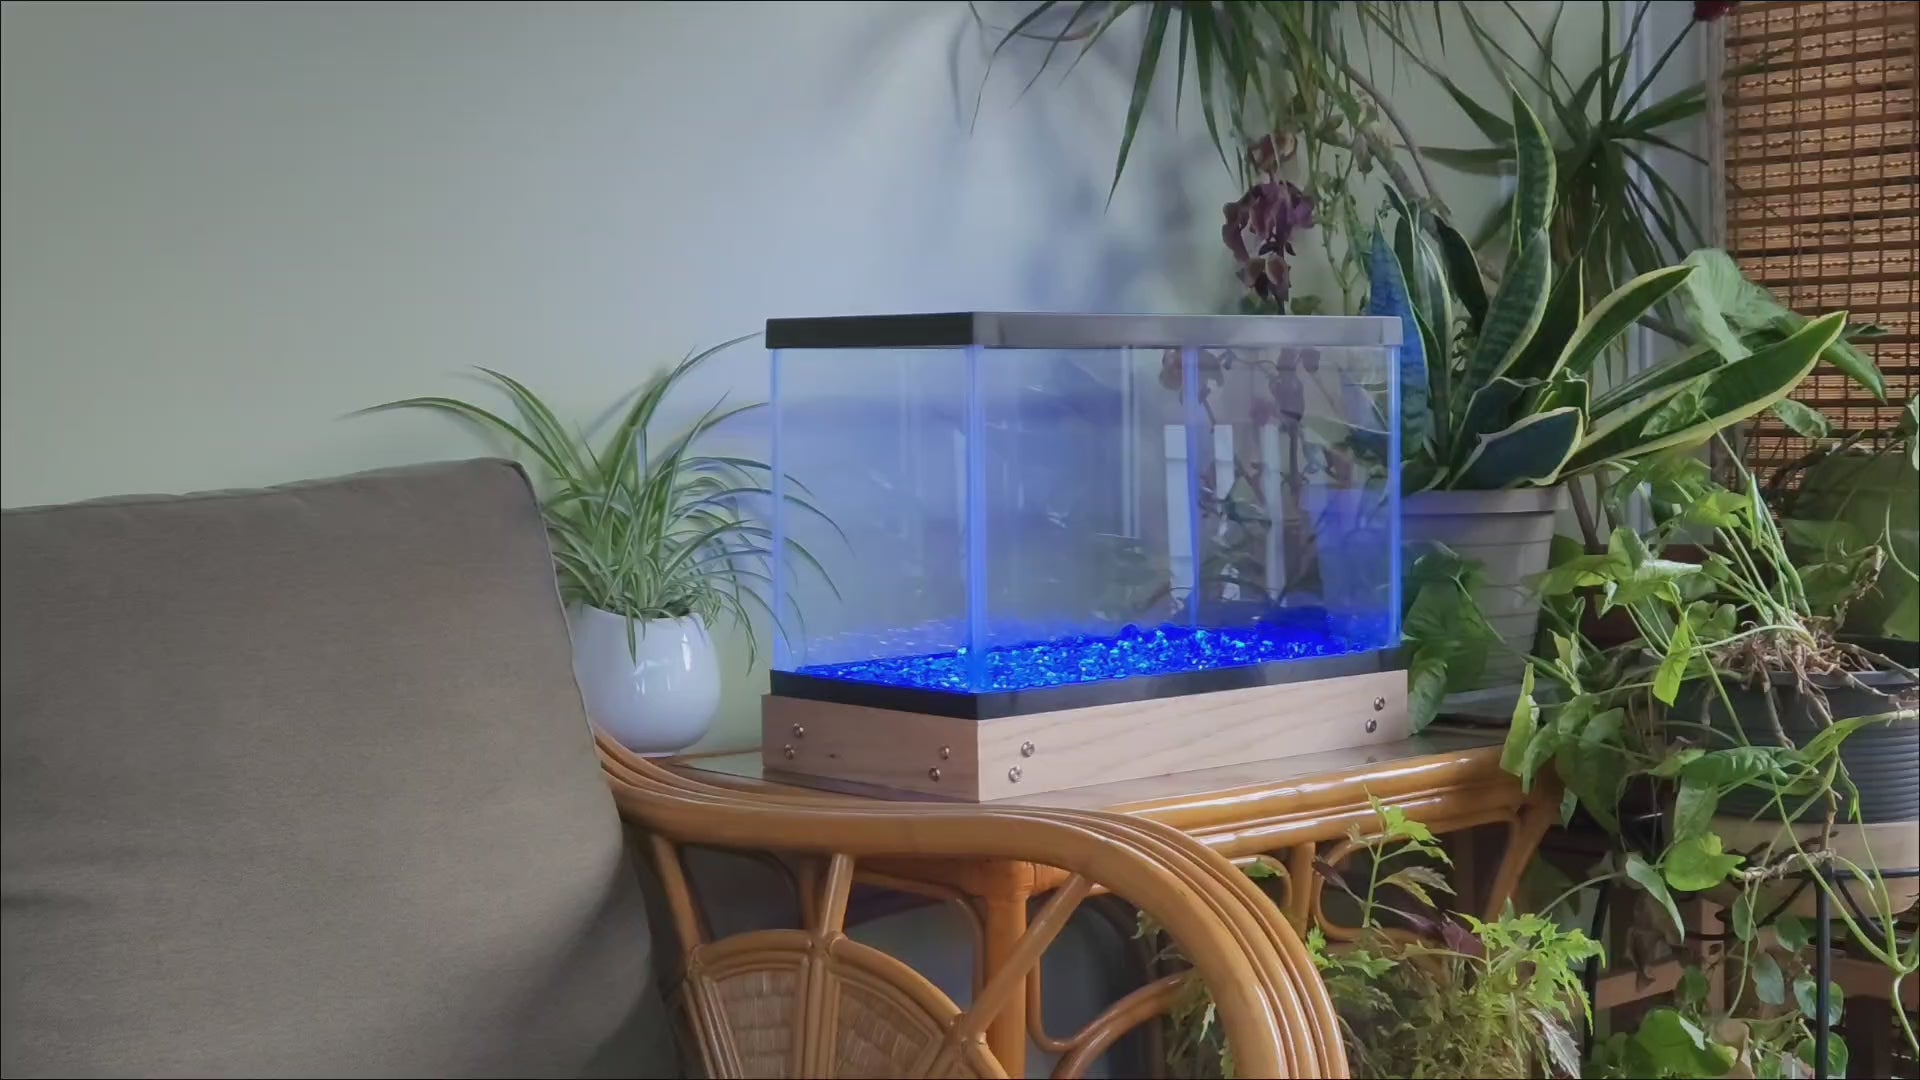 Load video: LED fish tank lights in solid colors.